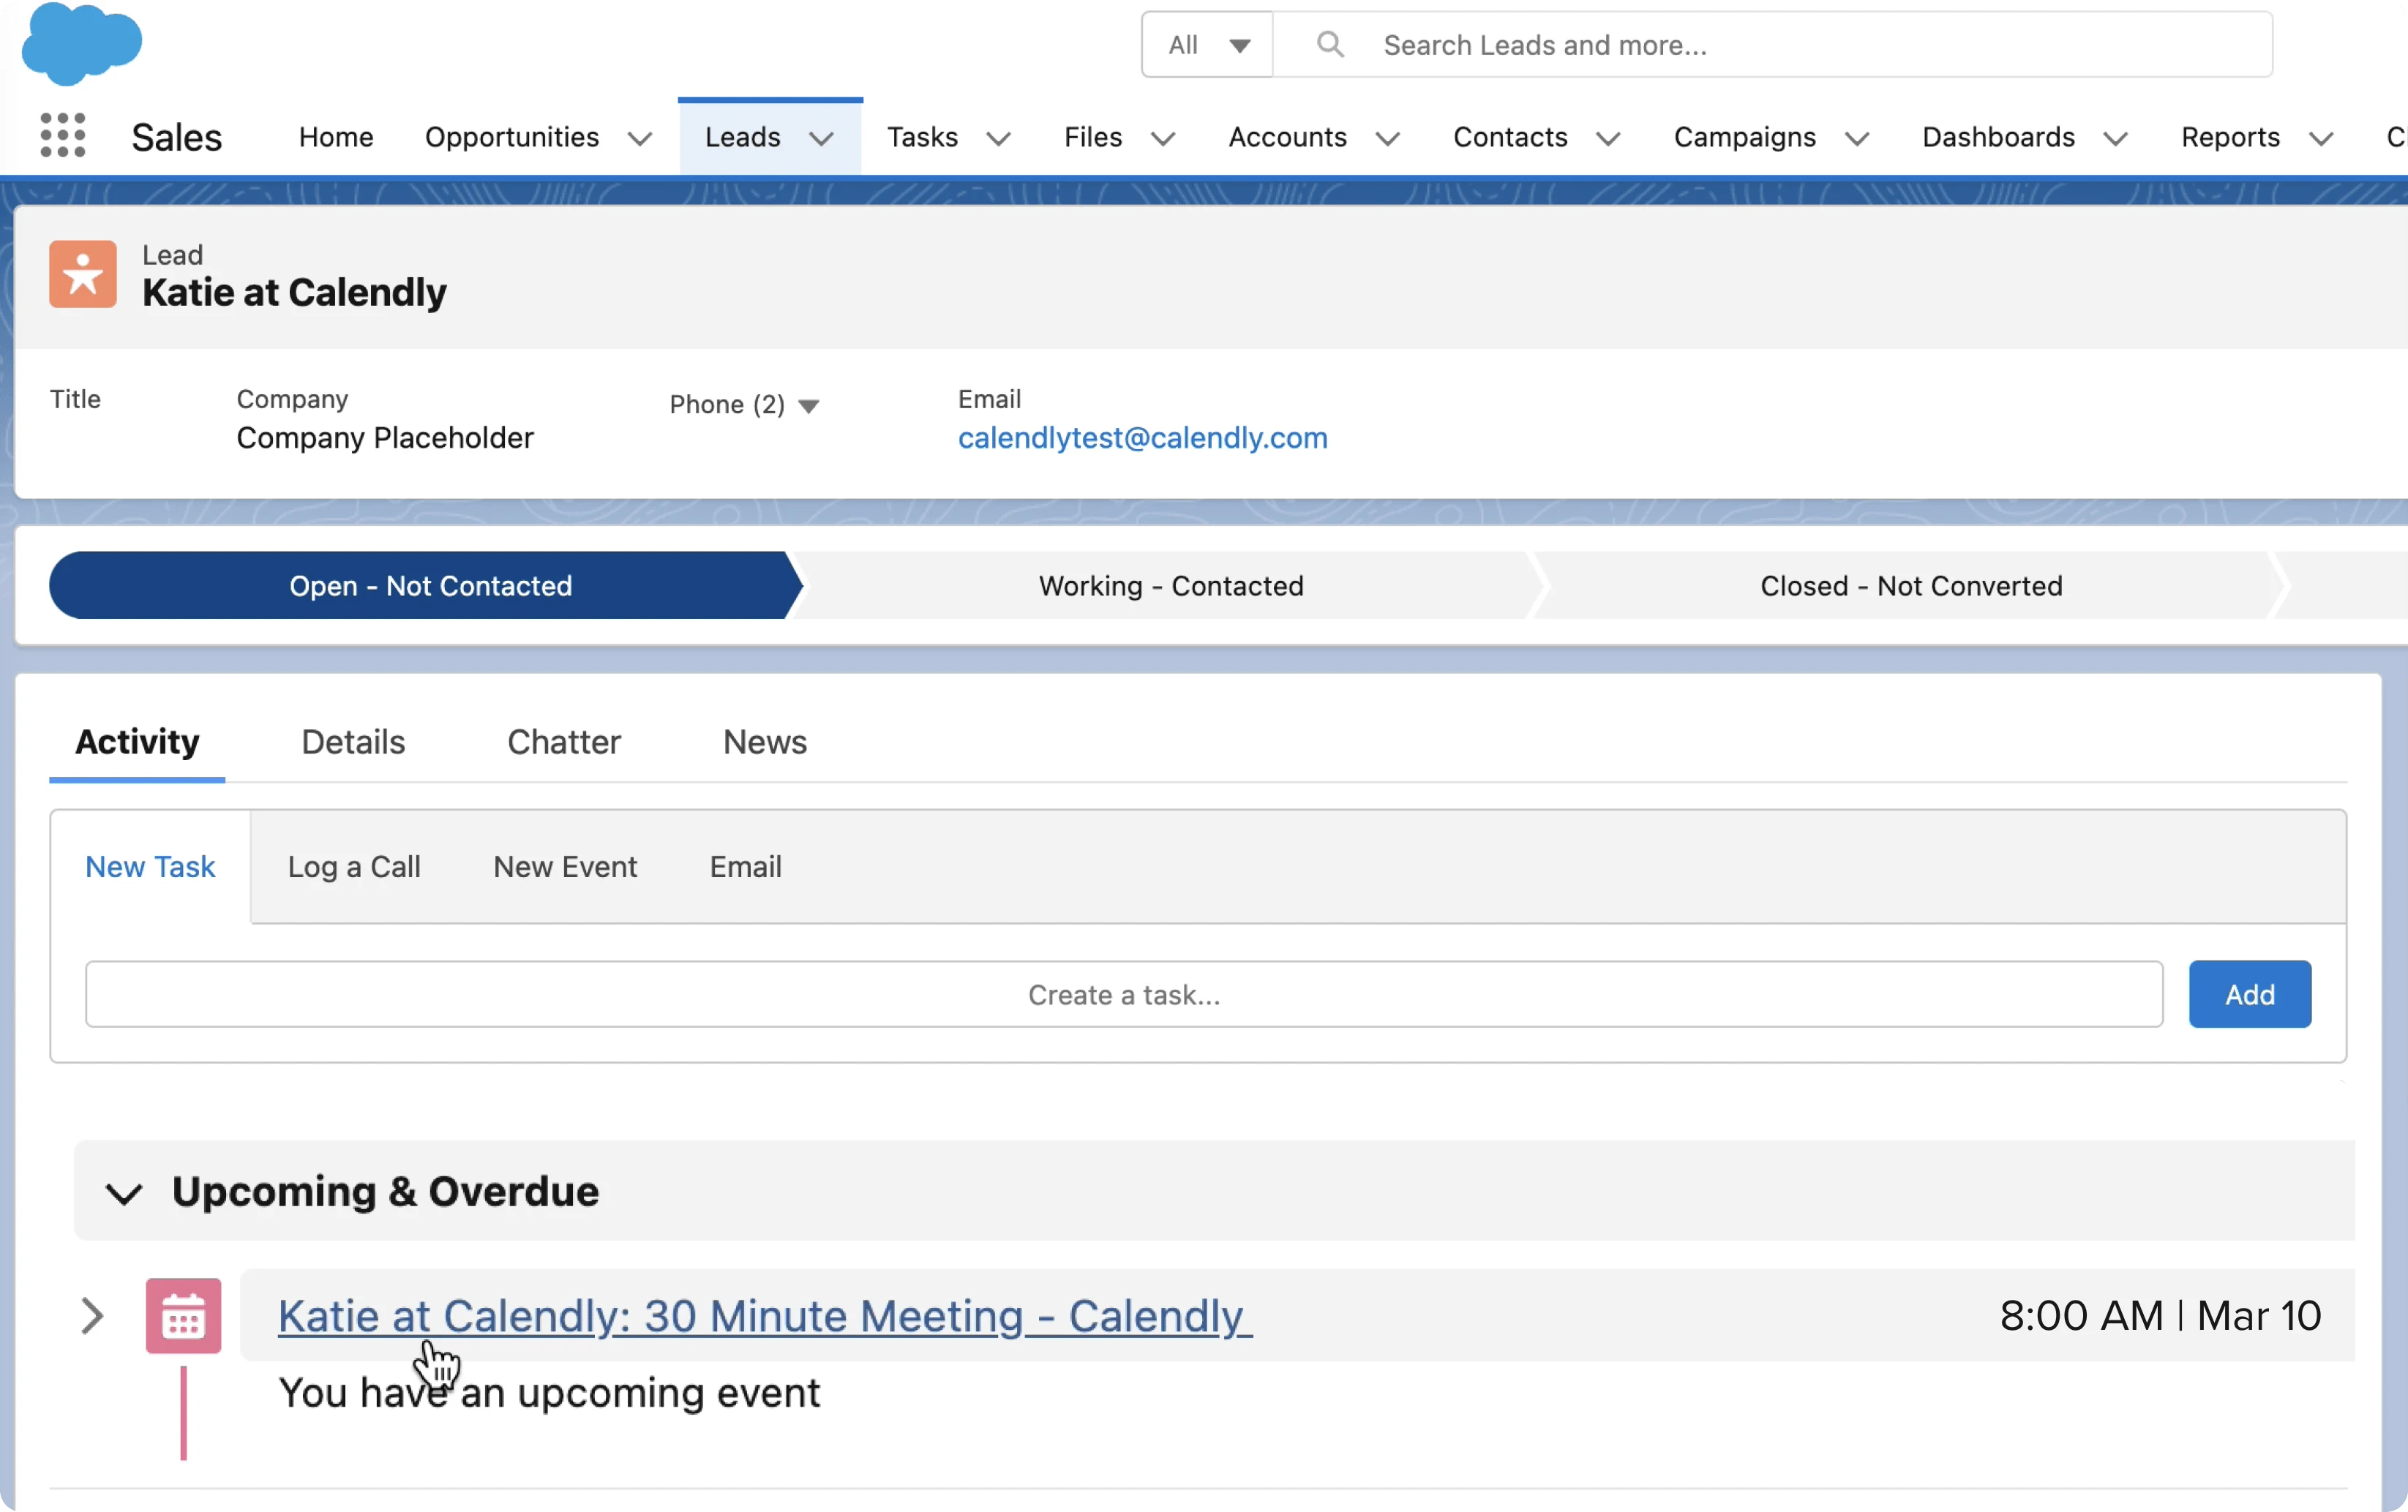 Screen image of Calendly meeting Event Type embedded in Salesforce activity record